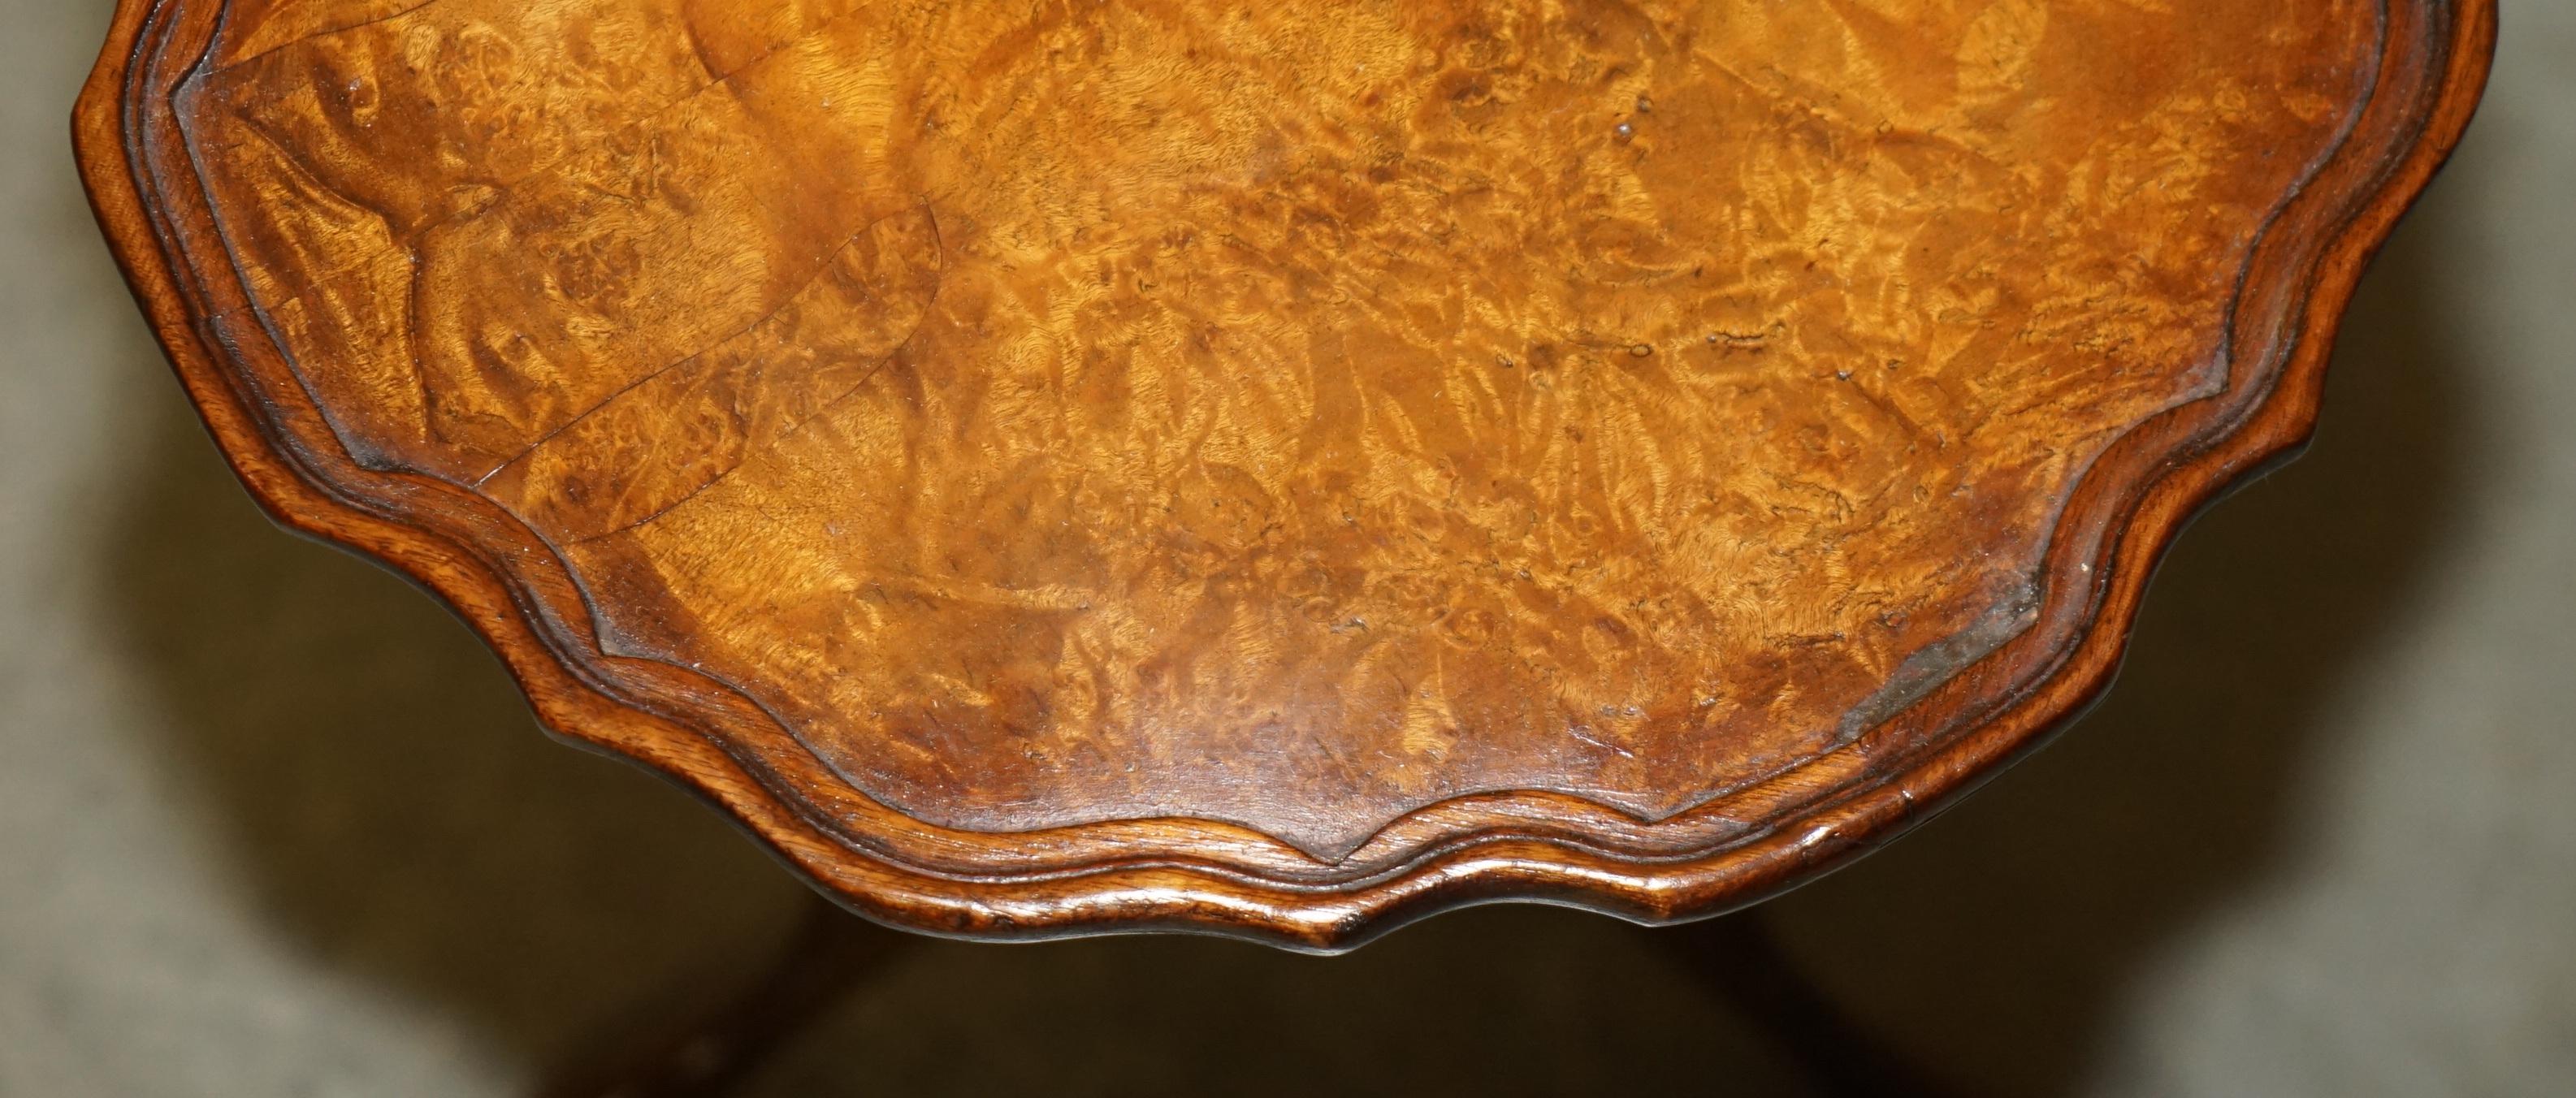 Early 20th Century FULLY RESTORED SUBLIME ANTIQUE CIRCA 1920 BURR WALNUT TRIPOD SiDE END LAMP TABLE